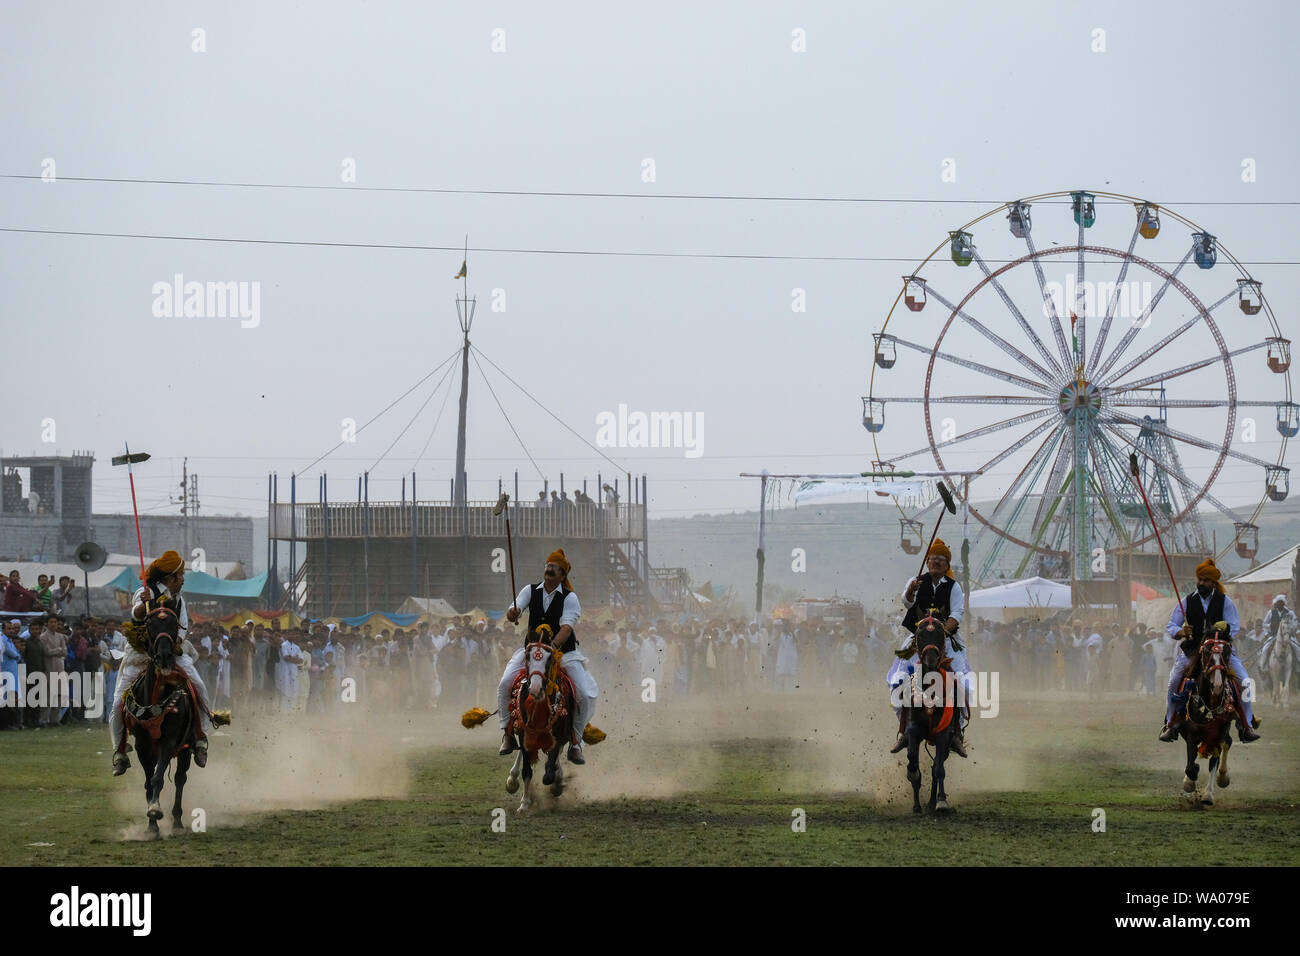 Team of Tent Pegging horse riders approaching towards the ground targets at cultural festival Pakistan. Stock Photo